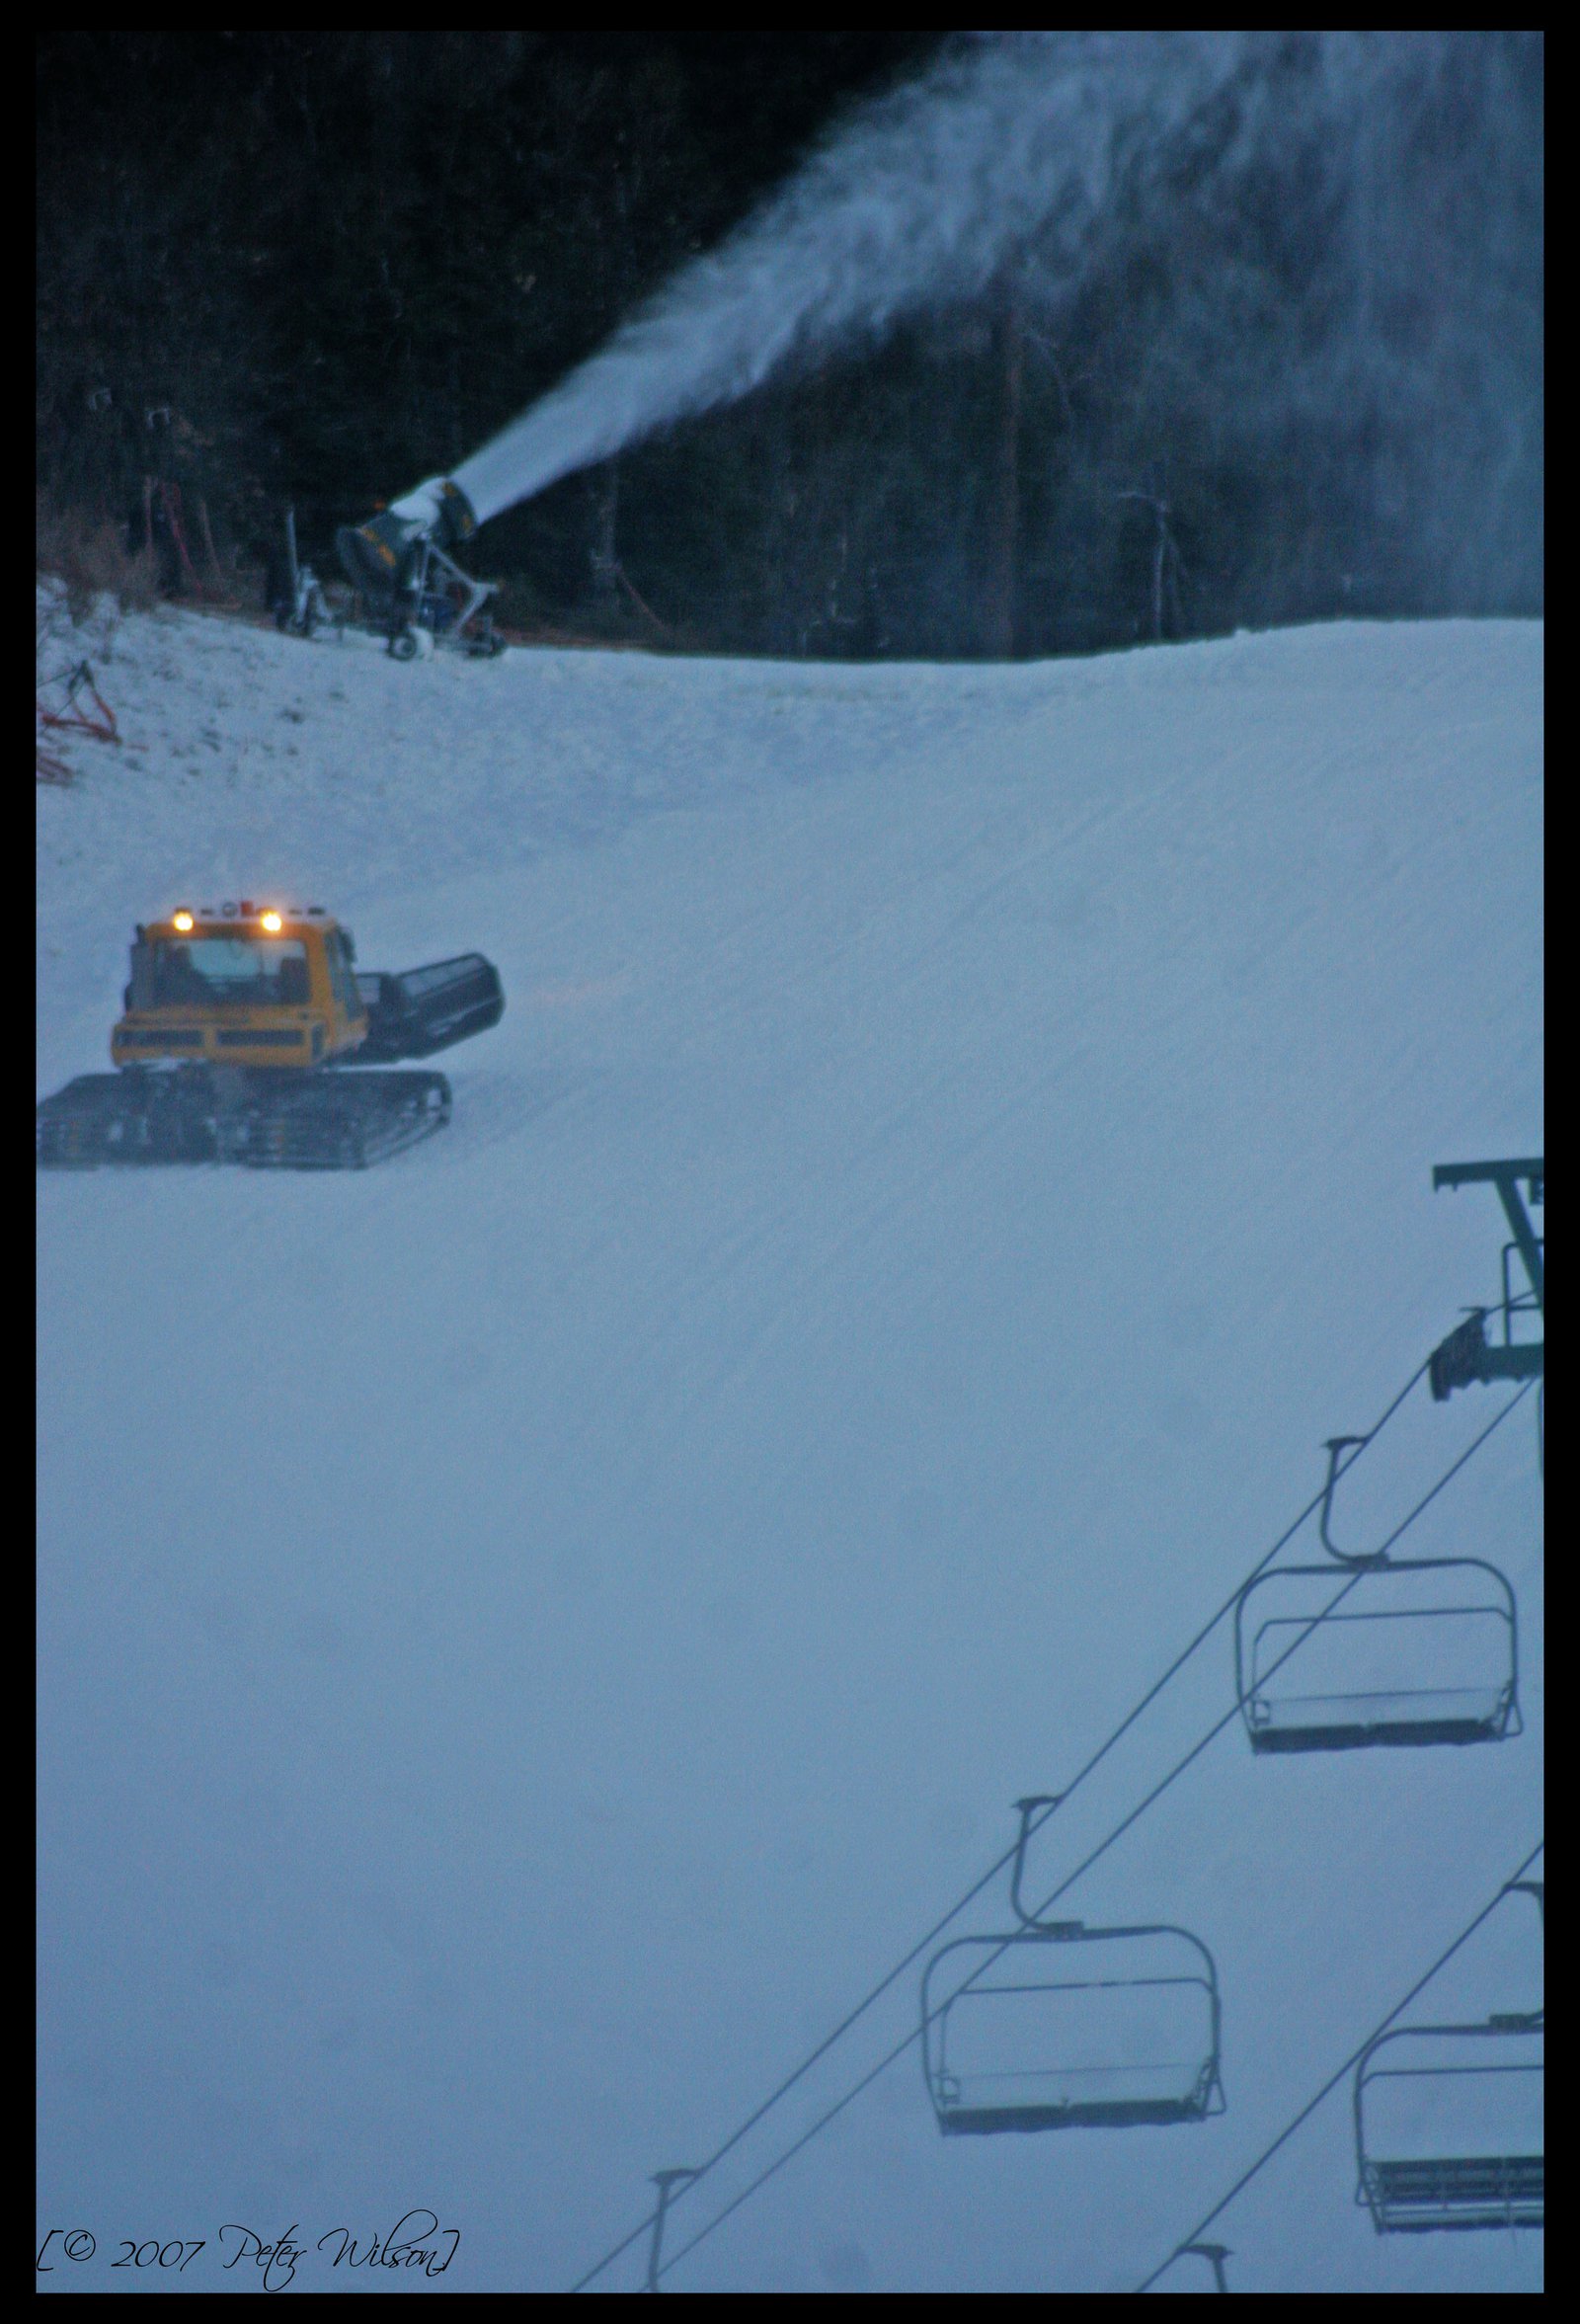 Snowcat and snowmaking